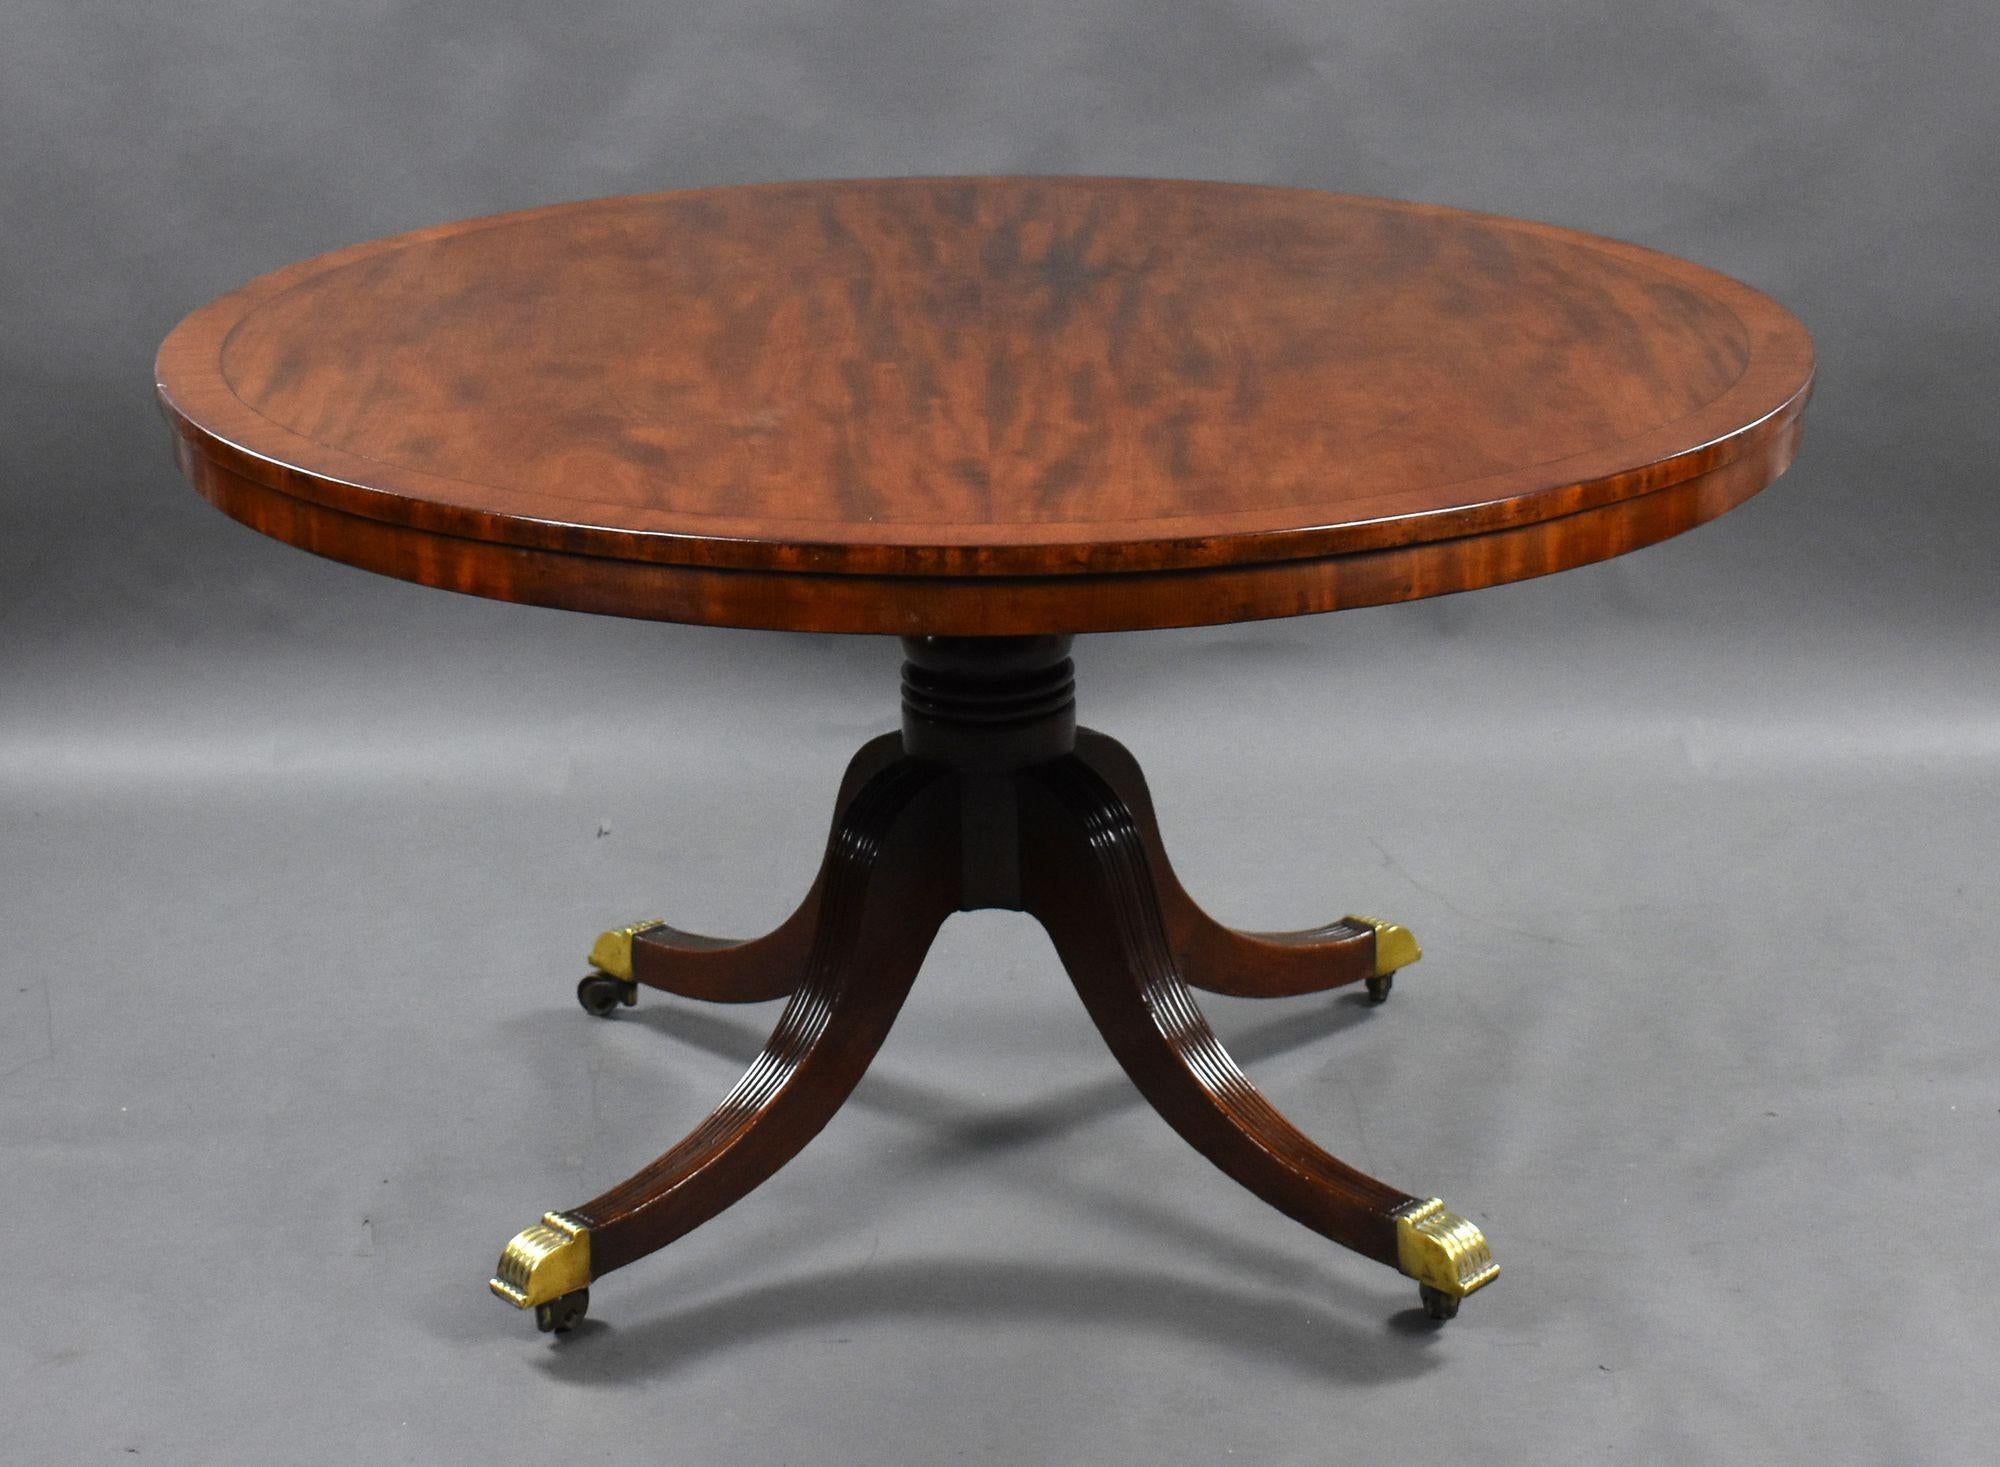 For sale is a good quality, possibly Irish, Regency mahogany circular breakfast table, the fiddleback mahogany top with an ebony inlaid border on four reeded and swept legs terminating on original brass castors. This piece was purchased from Elveden